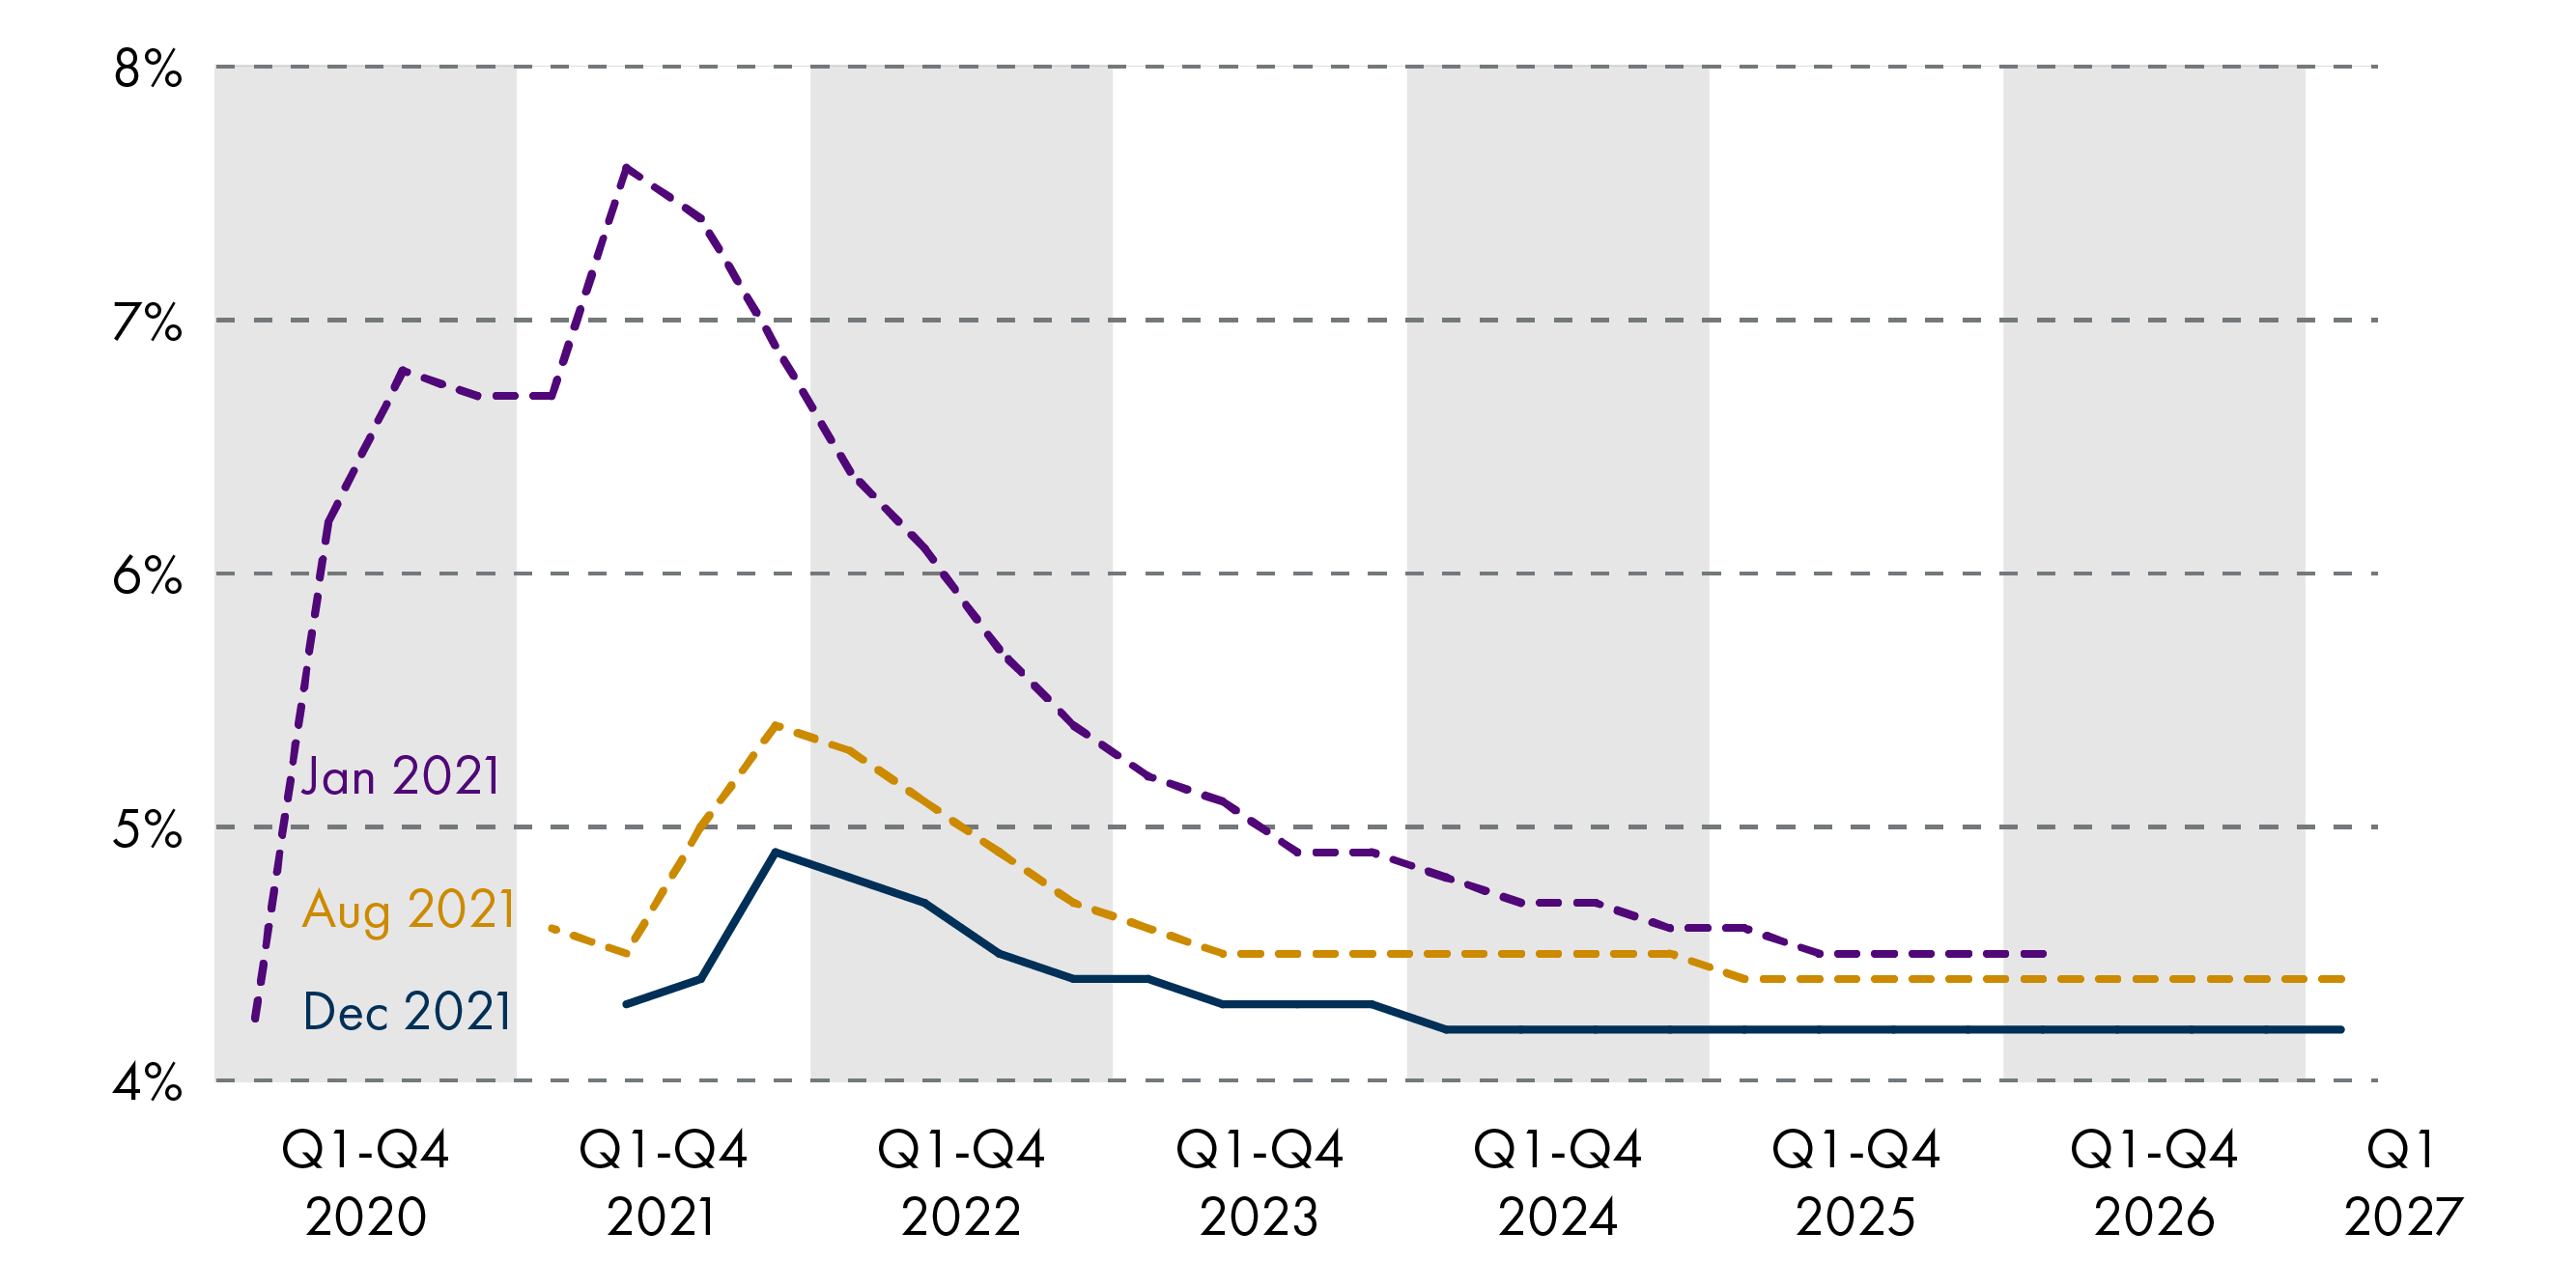 Figure 8 shows SFC forecasts for unemployment. The SFC now forecasts the unemployment rate will peak at 4.9 per cent in 2021 Q4. This is down from the peak forecasted in August 2021 of 5.4 per cent, and substantially lower than the January 2021 forecast where unemployment peaked at 7.6 per cent.